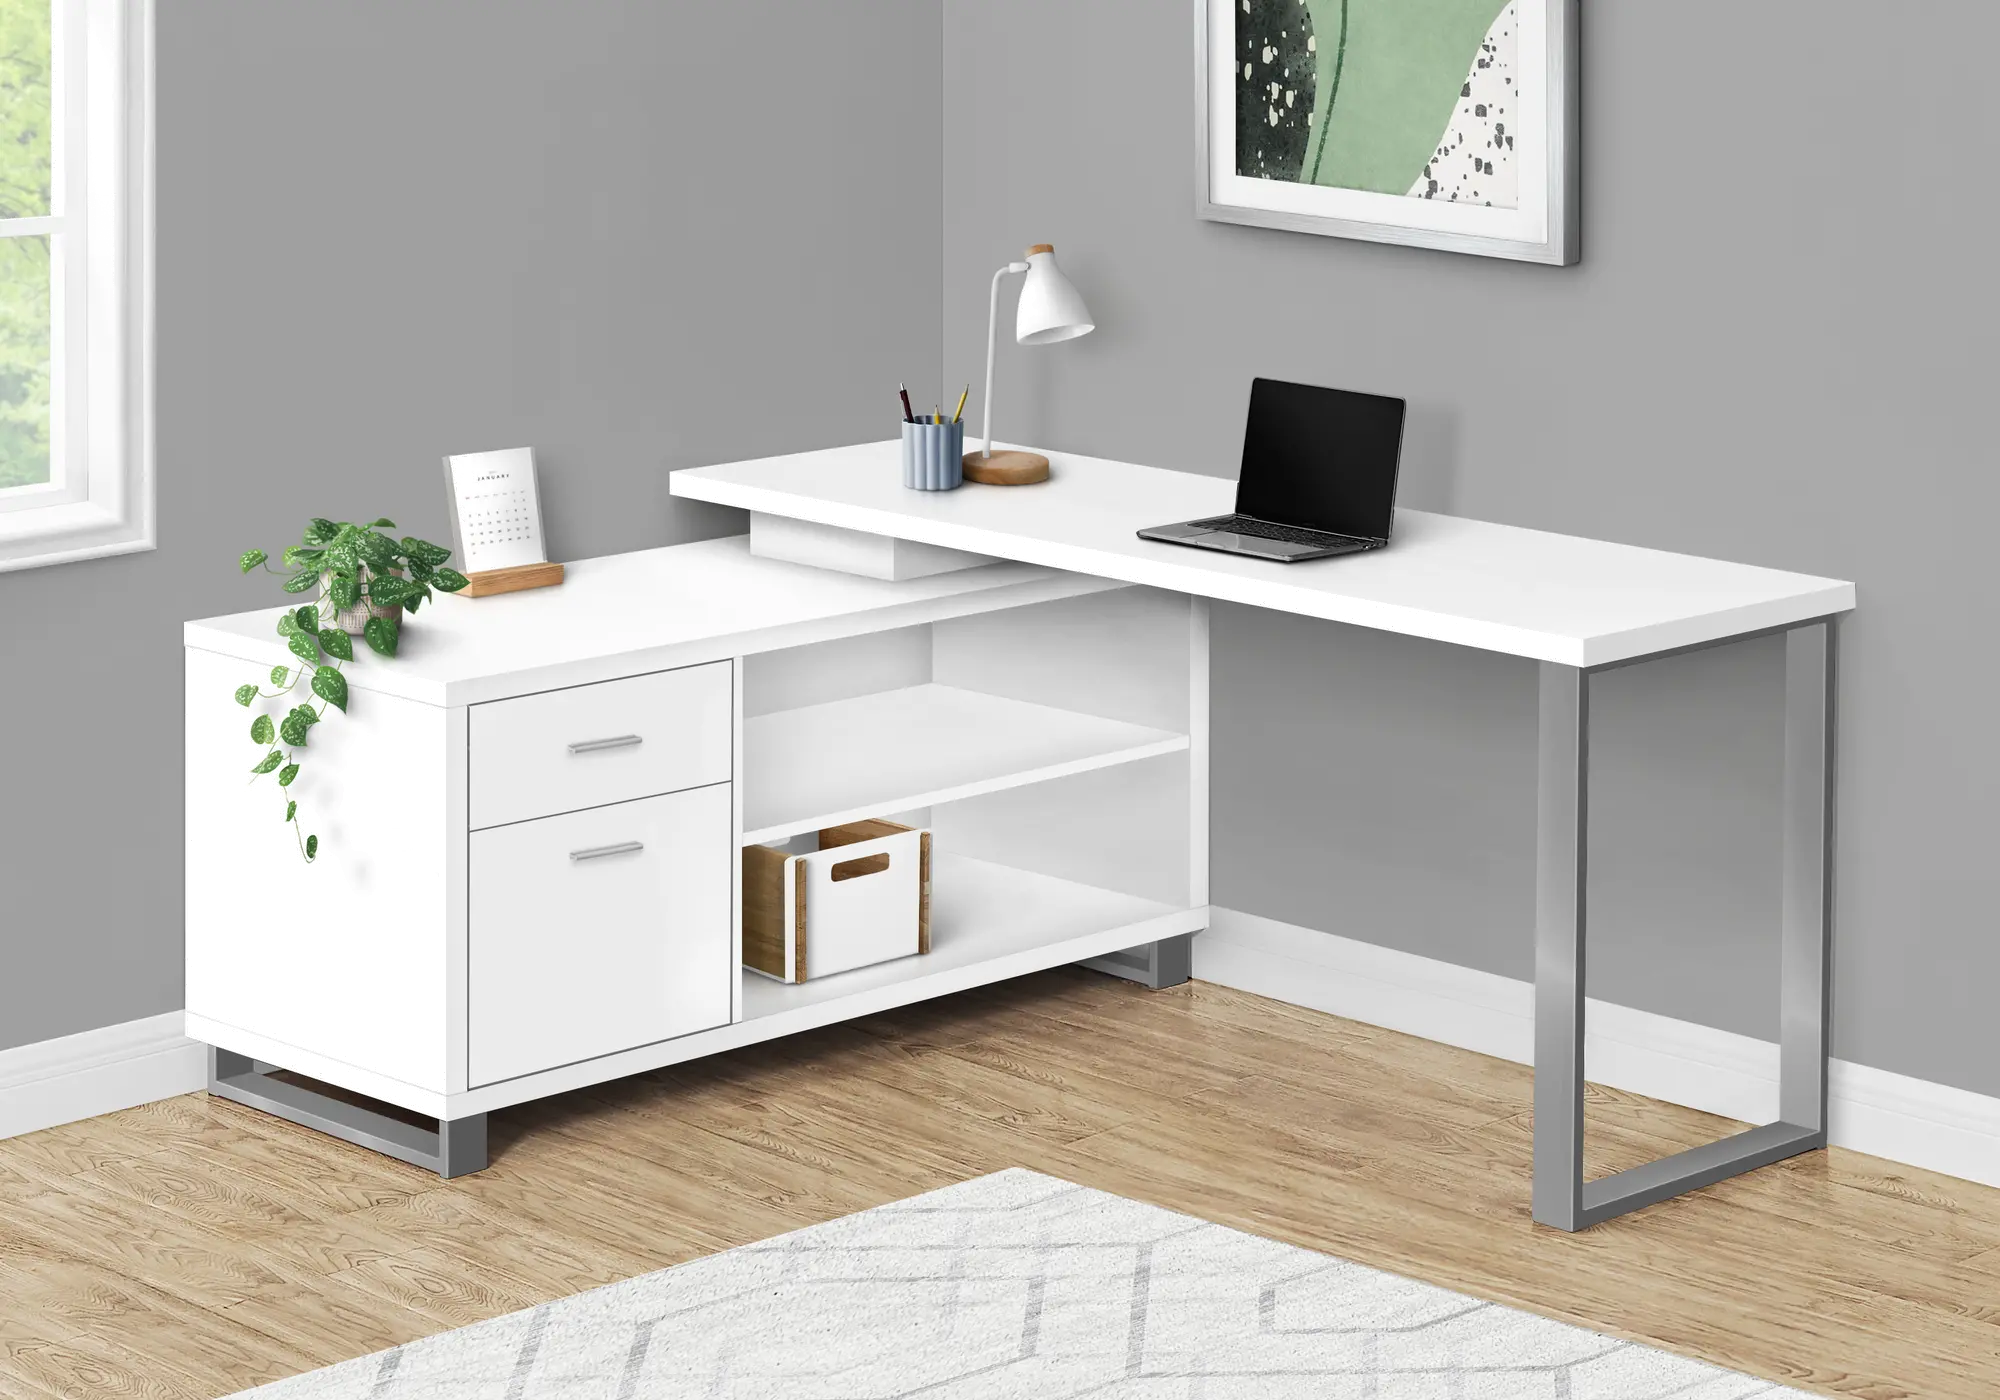 https://static.rcwilley.com/products/112698417/Monarch-White-72-L-Shaped-Computer-Desk-rcwilley-image1.webp